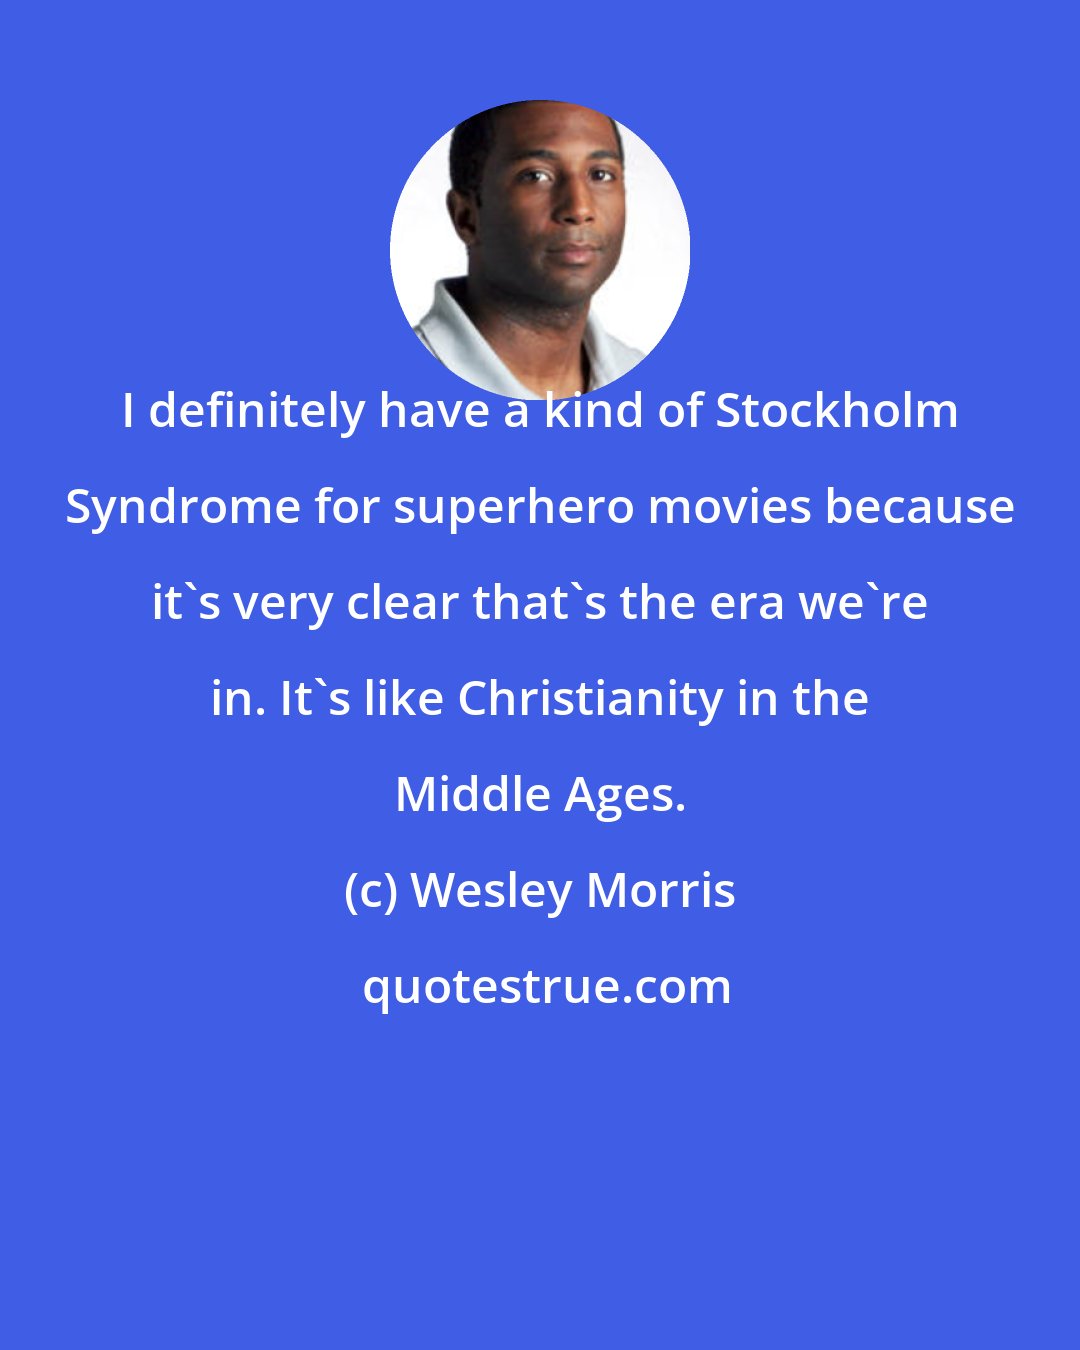 Wesley Morris: I definitely have a kind of Stockholm Syndrome for superhero movies because it's very clear that's the era we're in. It's like Christianity in the Middle Ages.